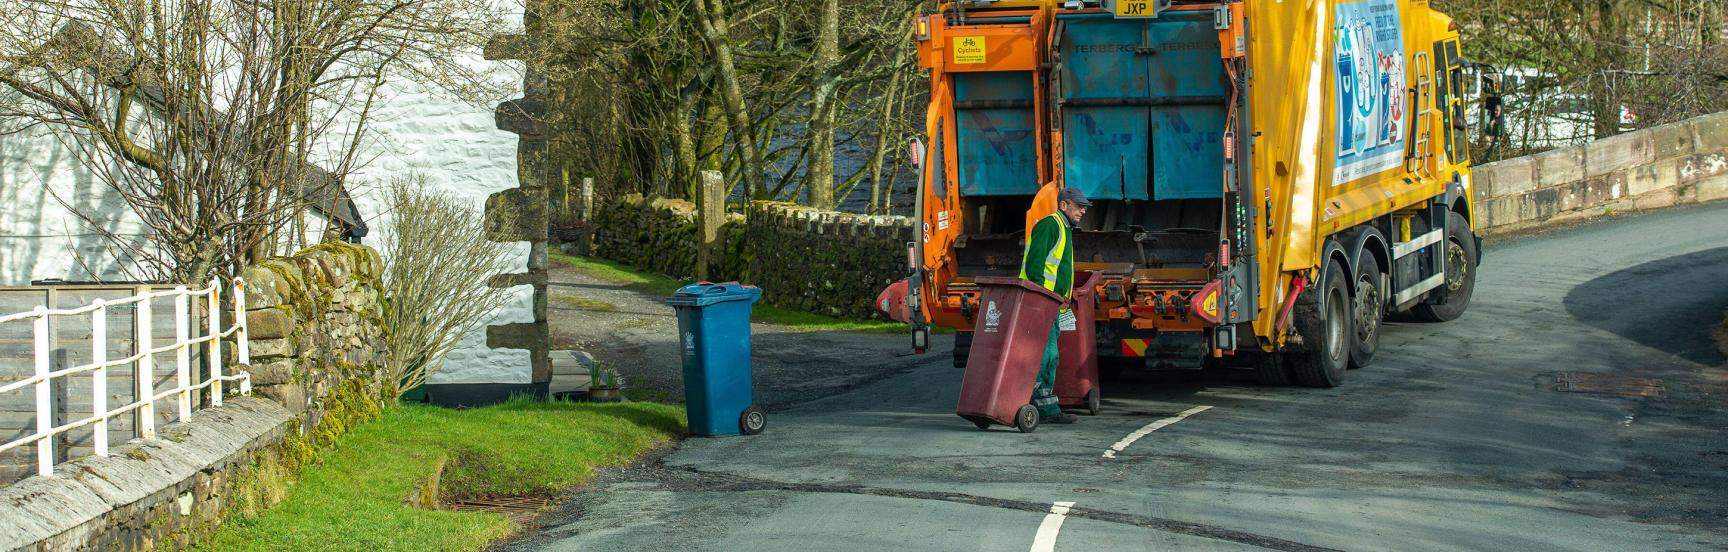 Refuse collection in Lancashire